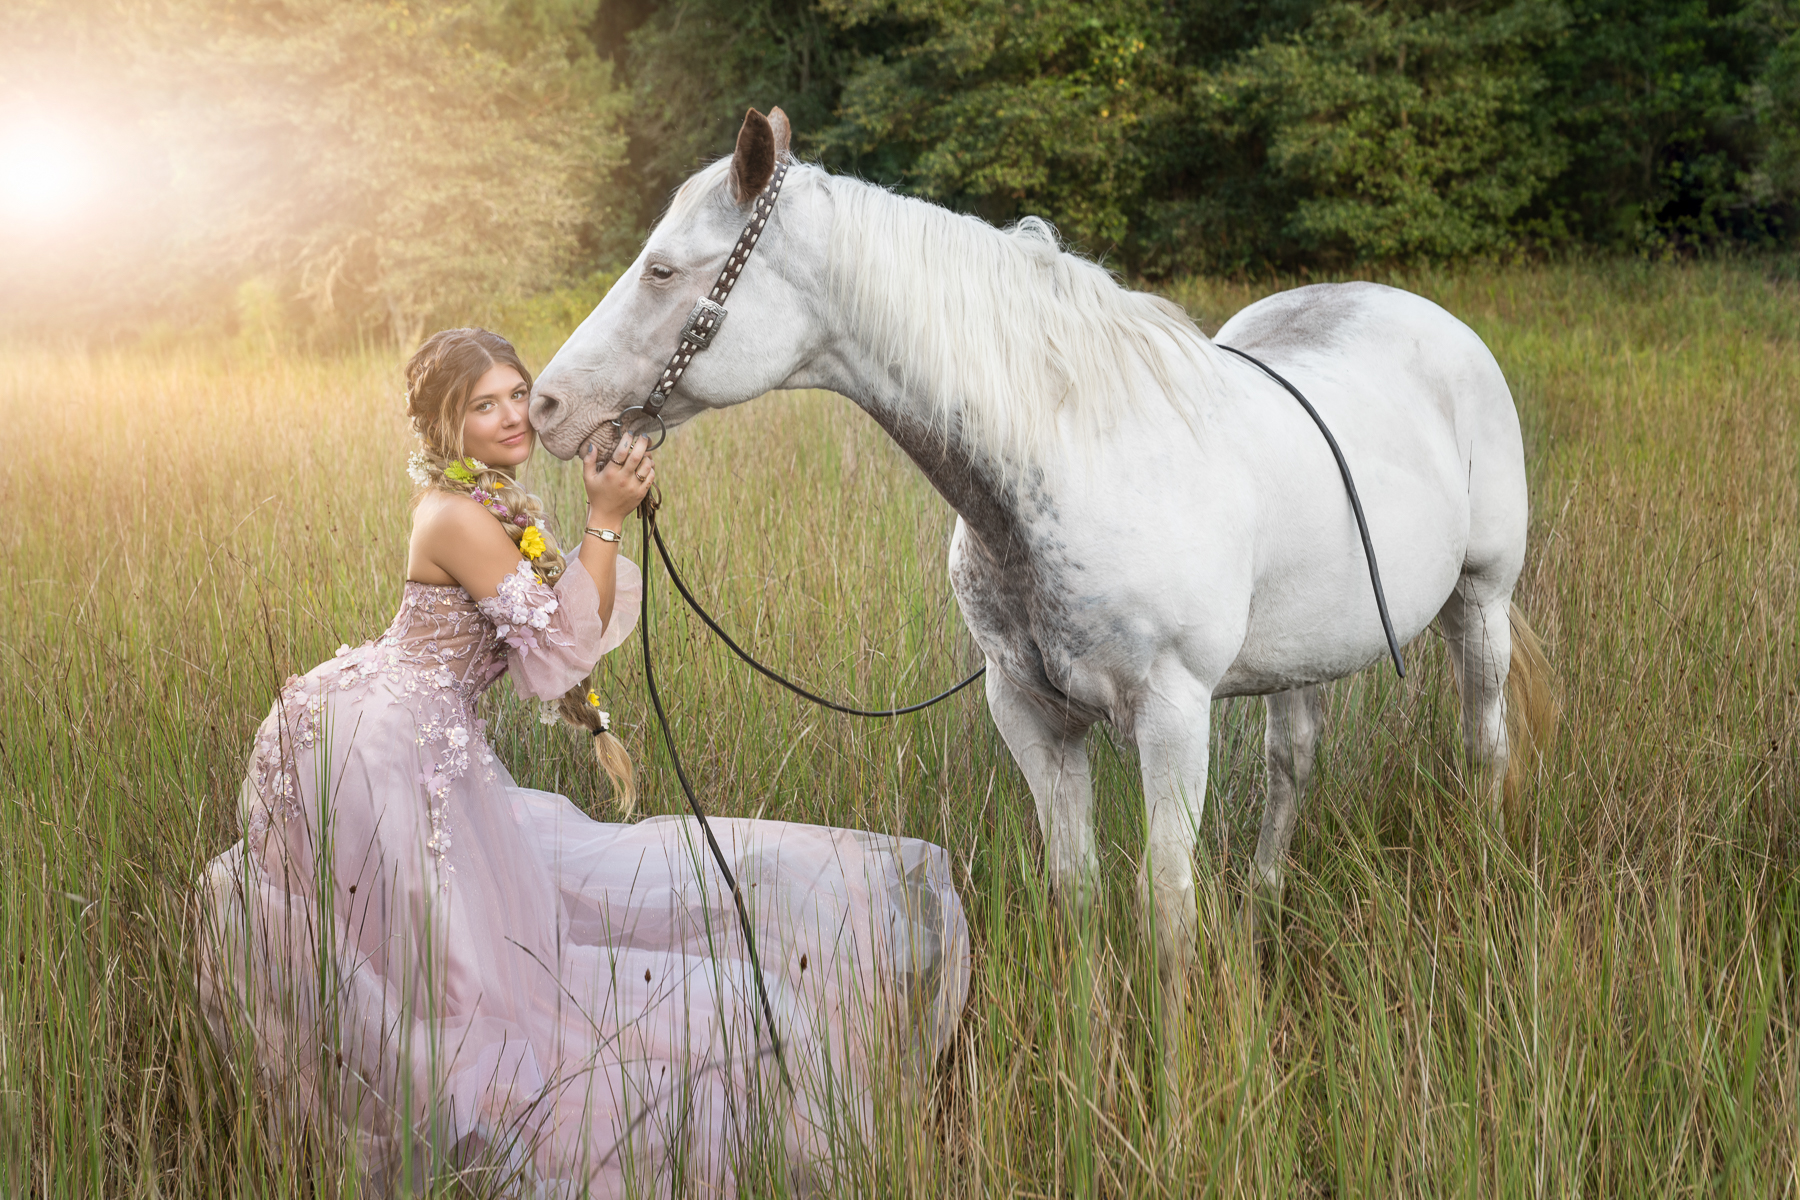 Glamour Photoshoot with woman in beautiful pink ballgown and horse in a field